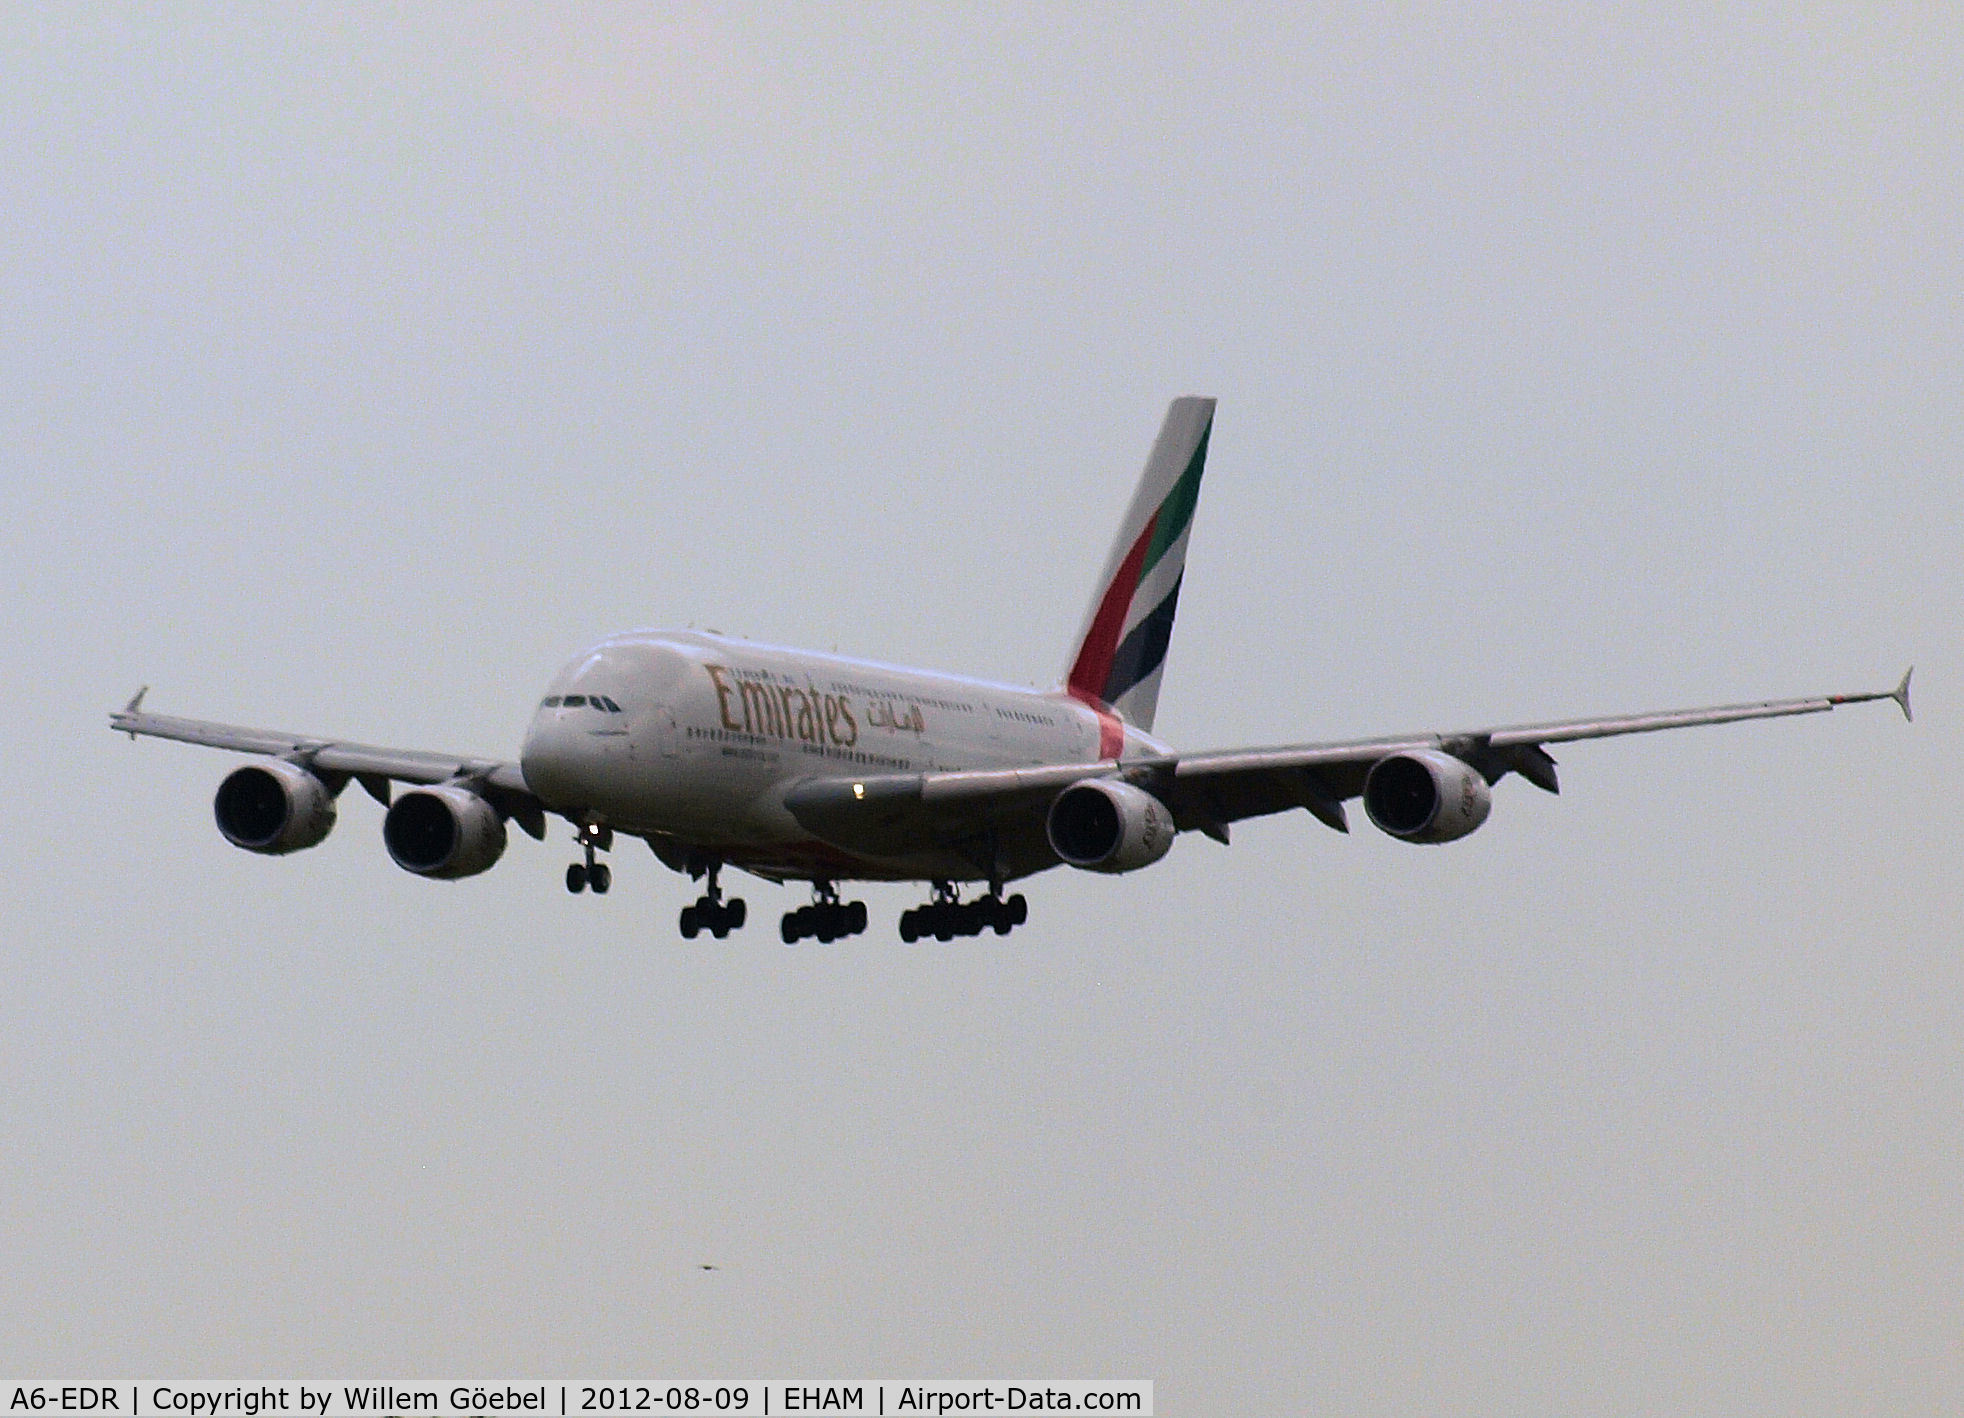 A6-EDR, 2011 Airbus A380-861 C/N 083, Arrival on runway R36 of Schiphol Airport